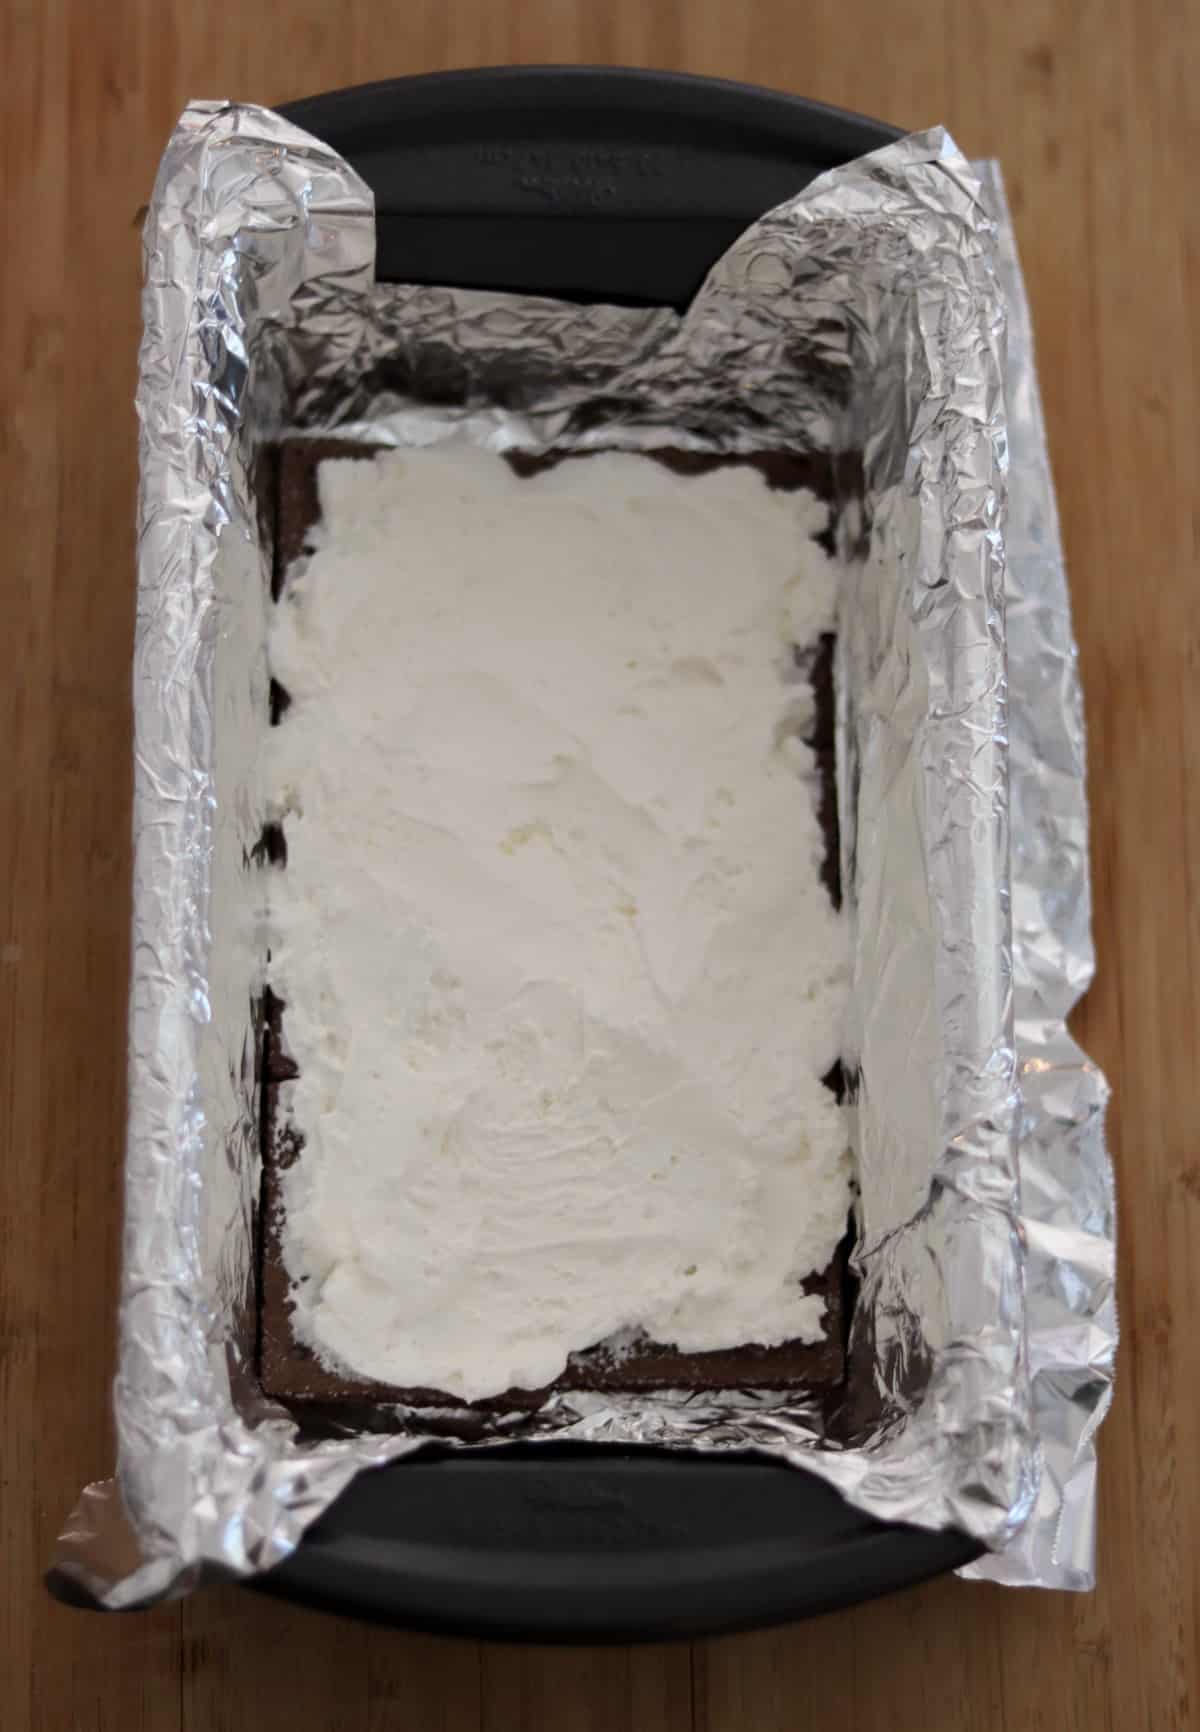 Foil-lined loaf pan with layer of chocolate graham crackers topped with frozen whipped topping.